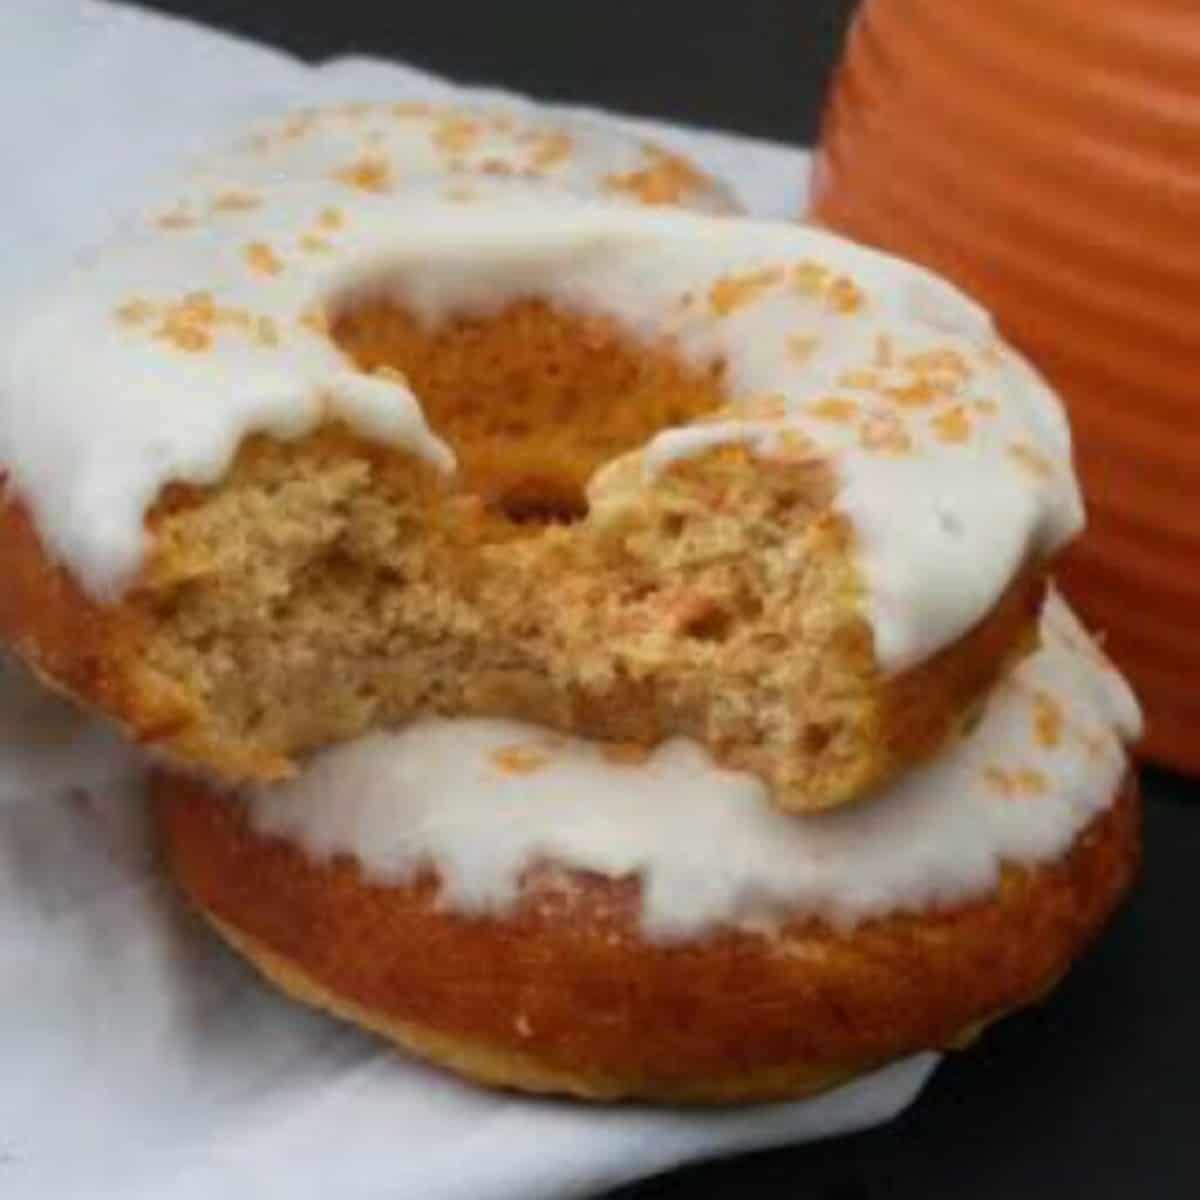 Two carrot cake donuts stacked on top of each other, with a bite taken out of one of them. The donuts are frosted with a cream cheese frosting 